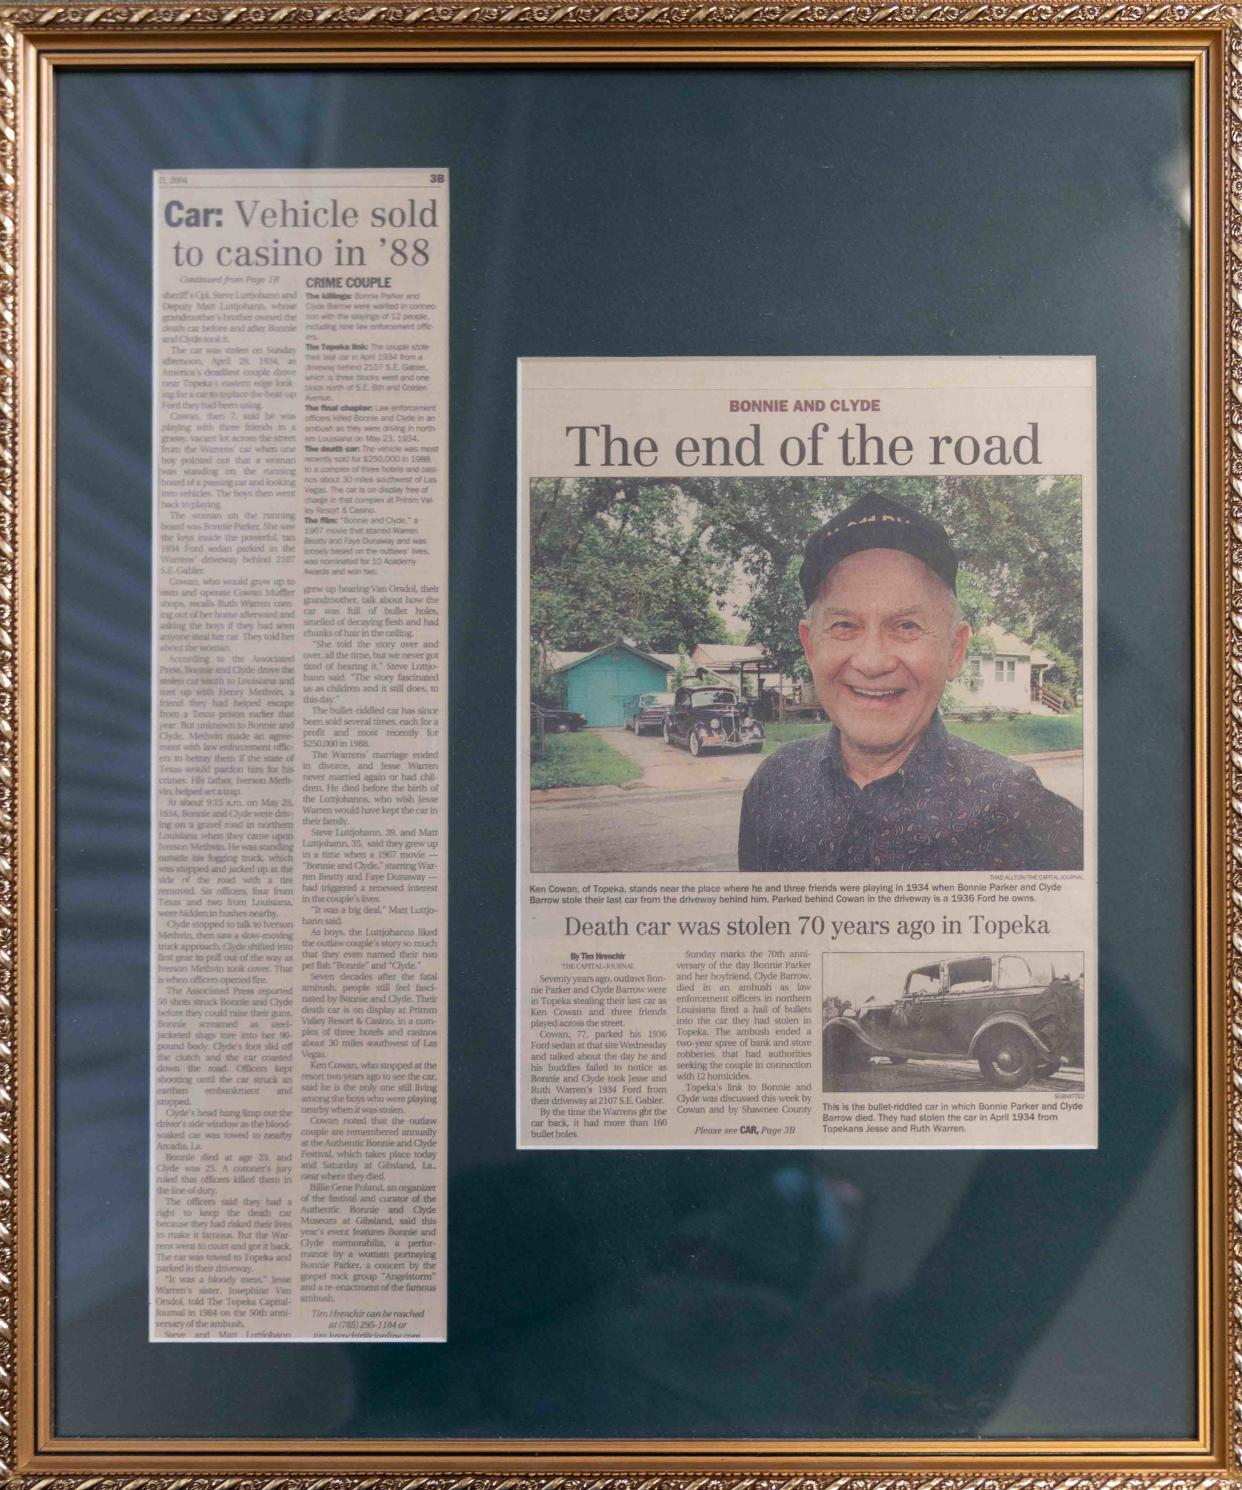 A framed article from The Capital-Journal shows a photo of Ken Cowan where he and his friends were playing at S.E. 6th and Gabler Street when Bonnie and Clyde stole their last vehicle.